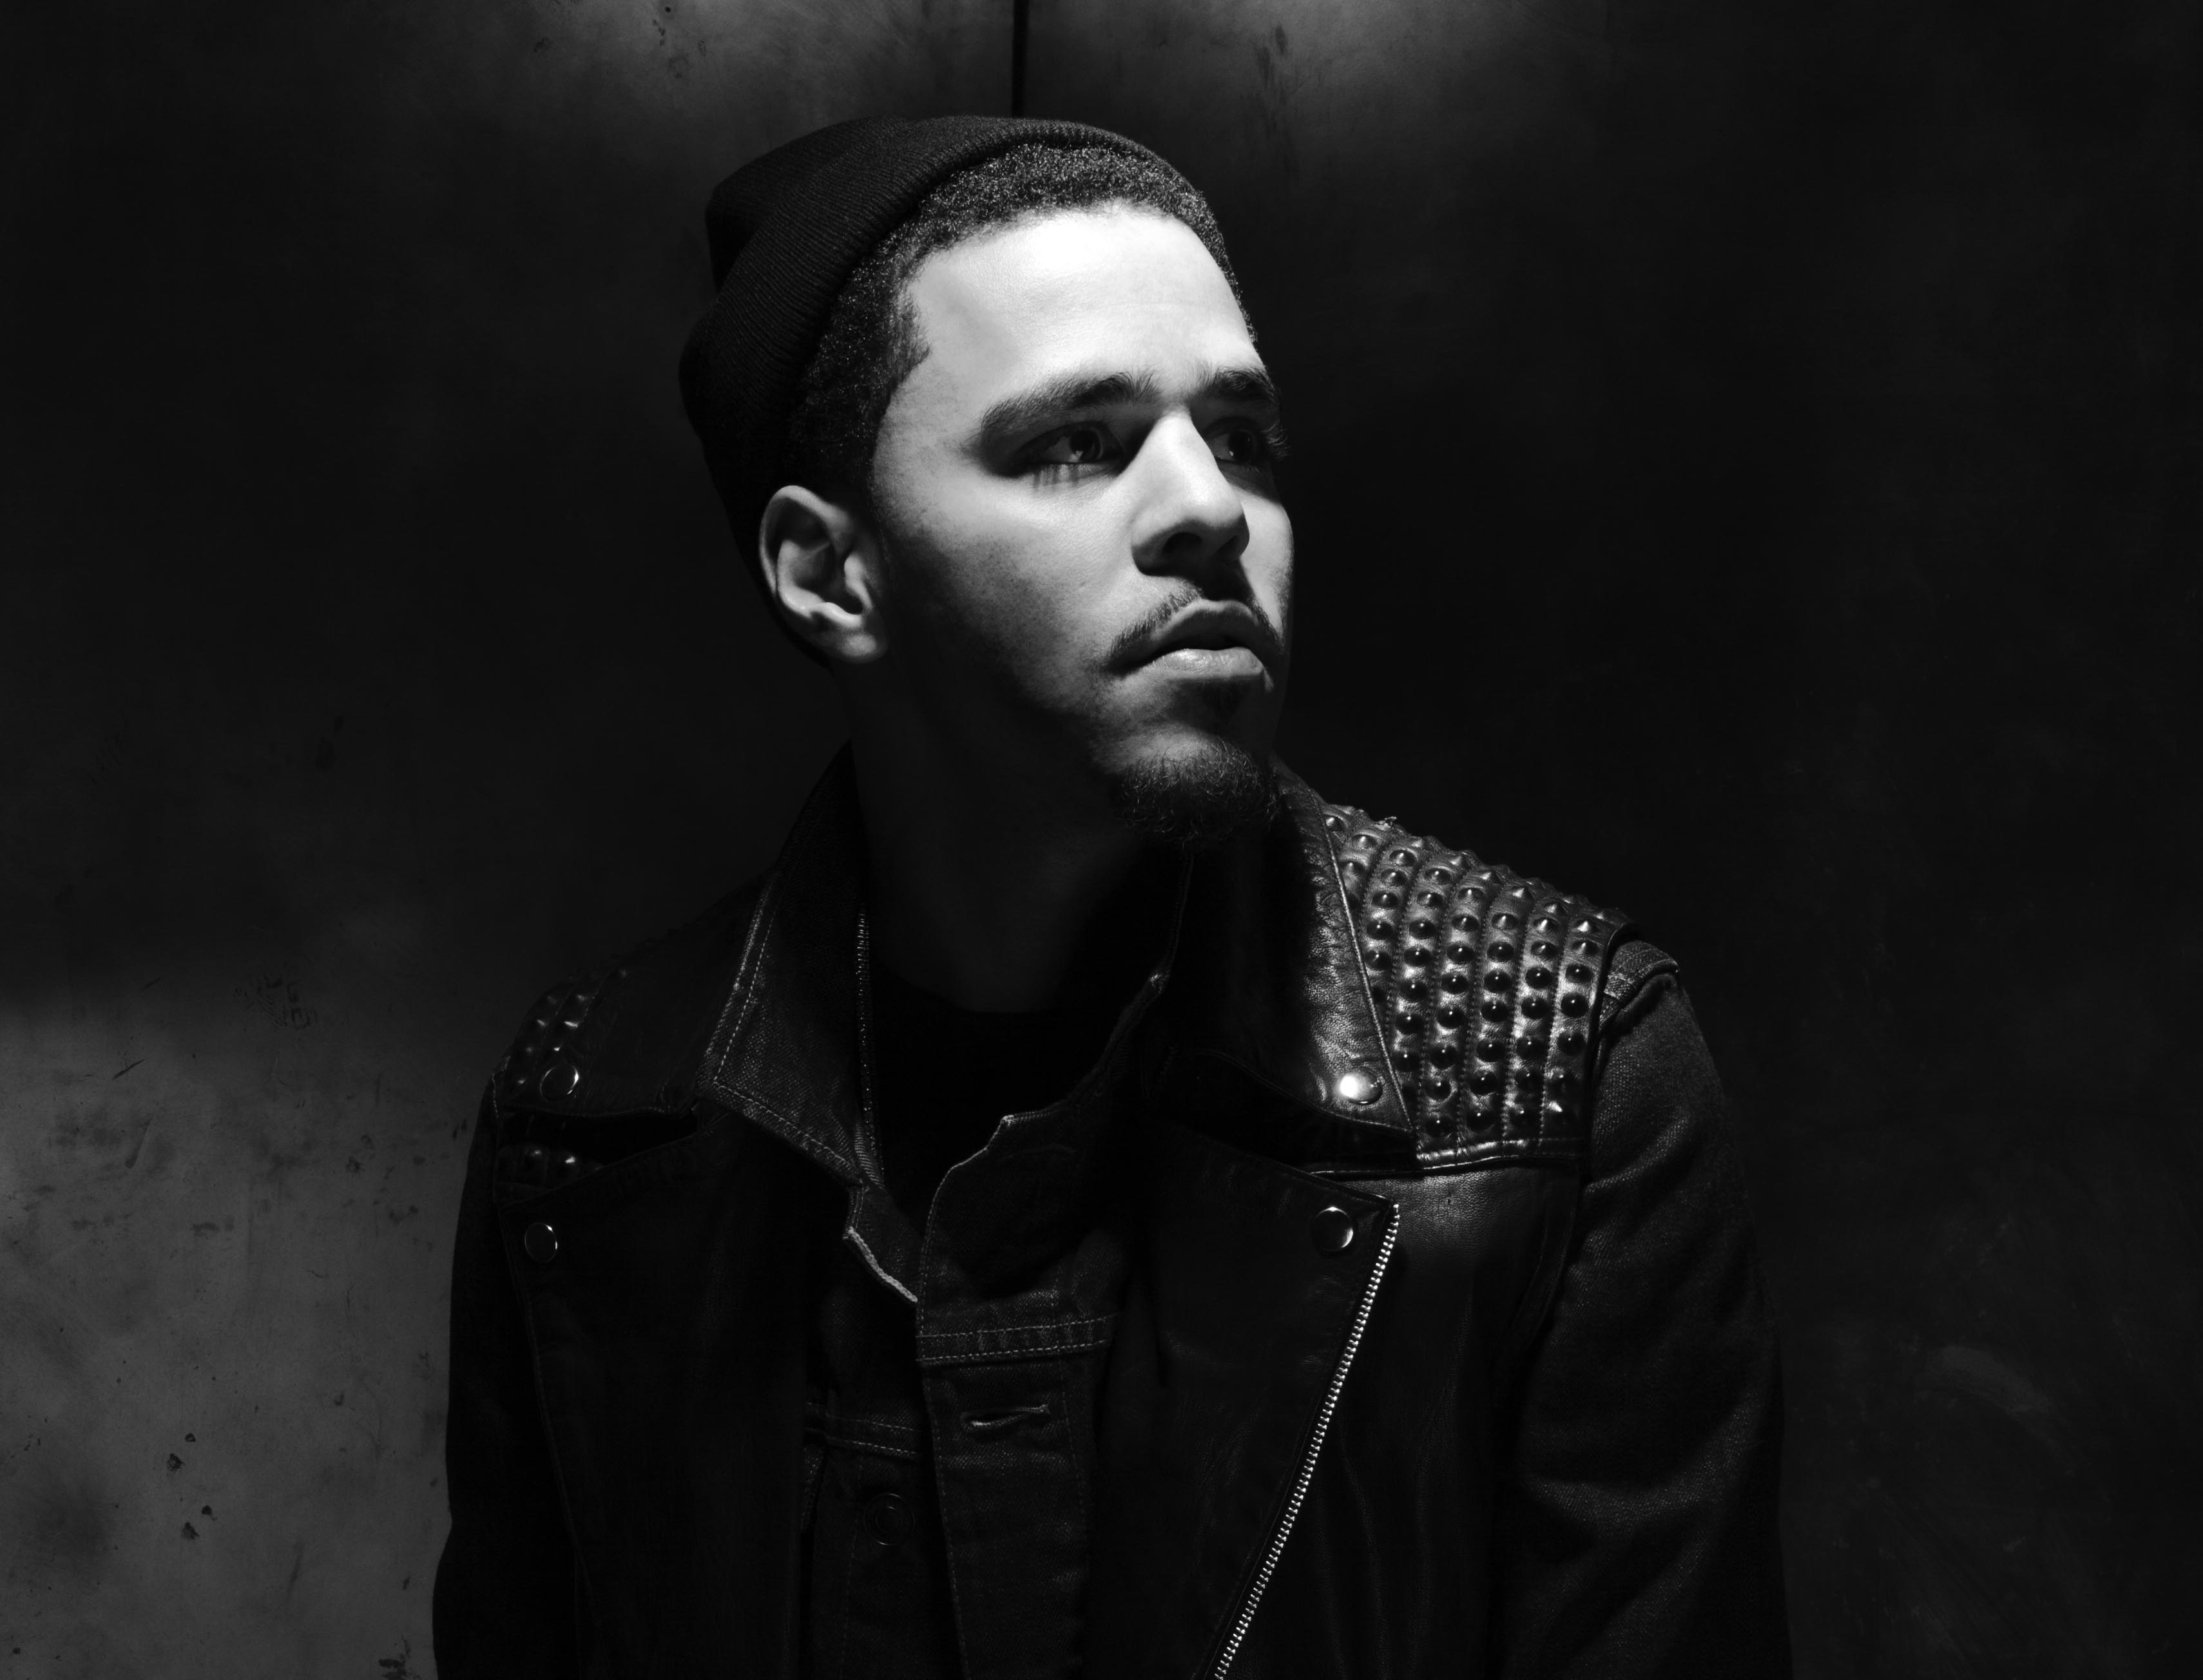 J. Cole Brings 'What Dreams May Come' Tour To Europe | Music News - Conversations ...3419 x 2608